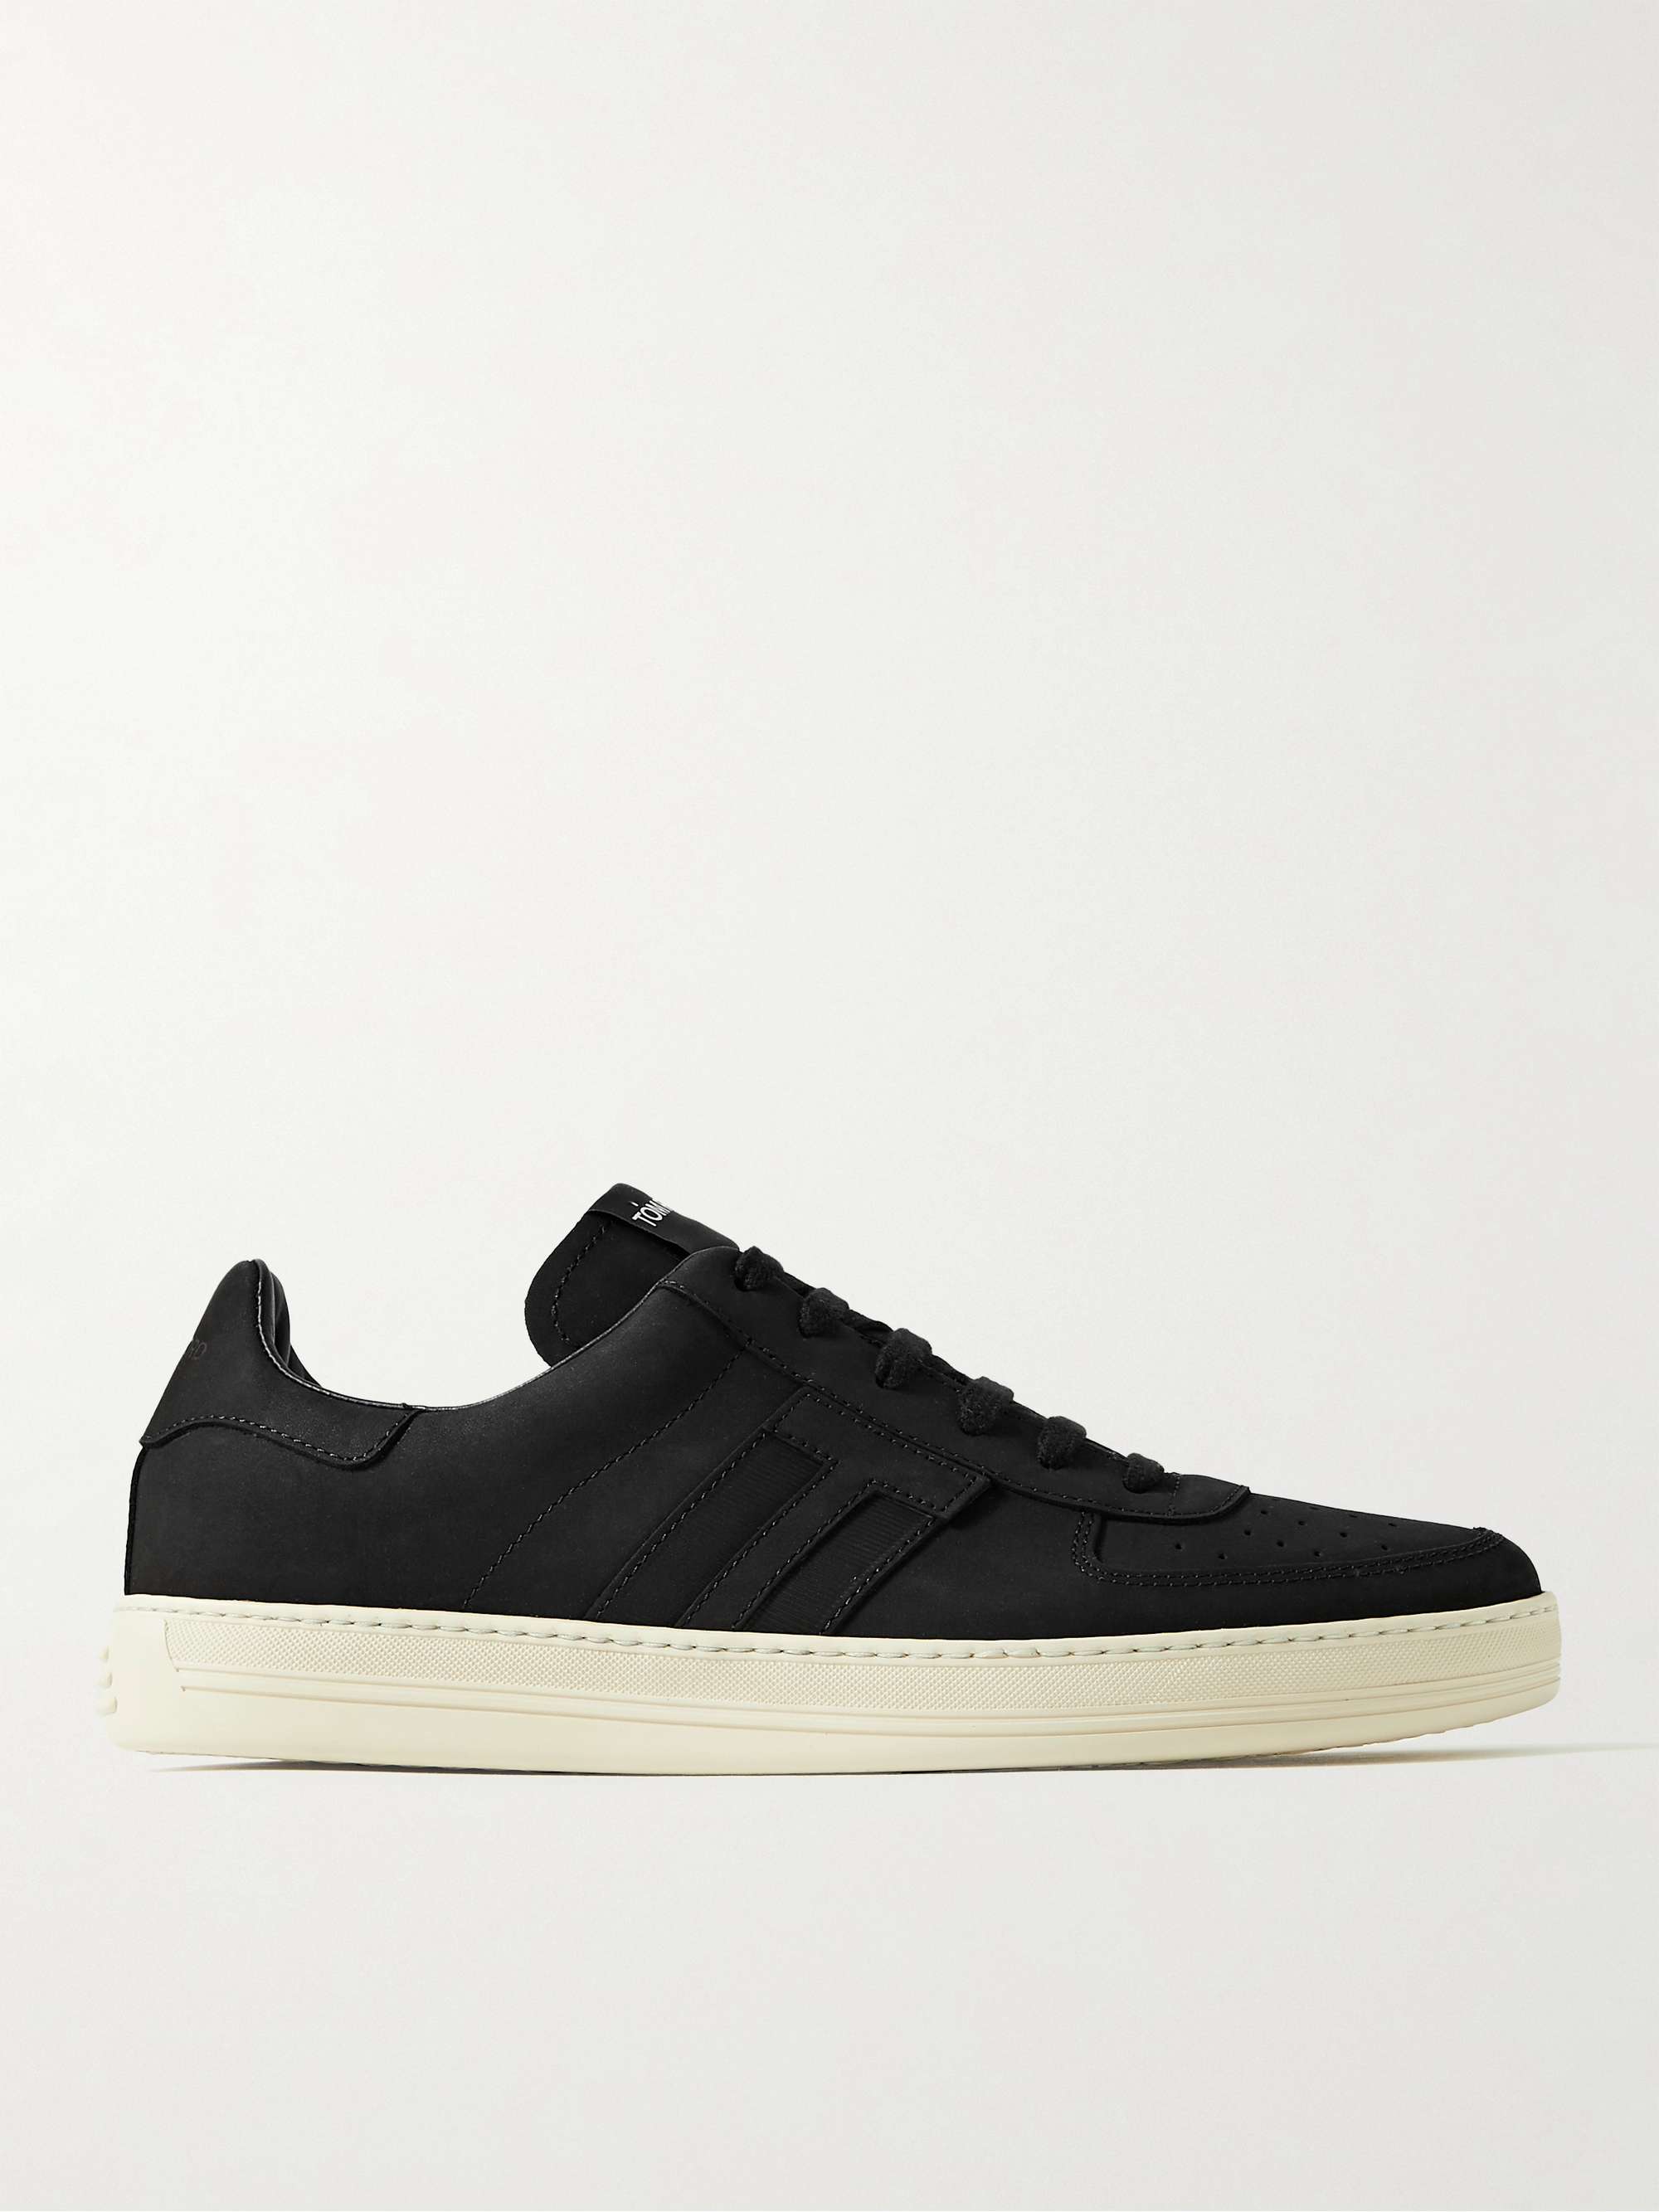 TOM FORD Radcliffe Leather-Trimmed Nubuck Sneakers | MR PORTER